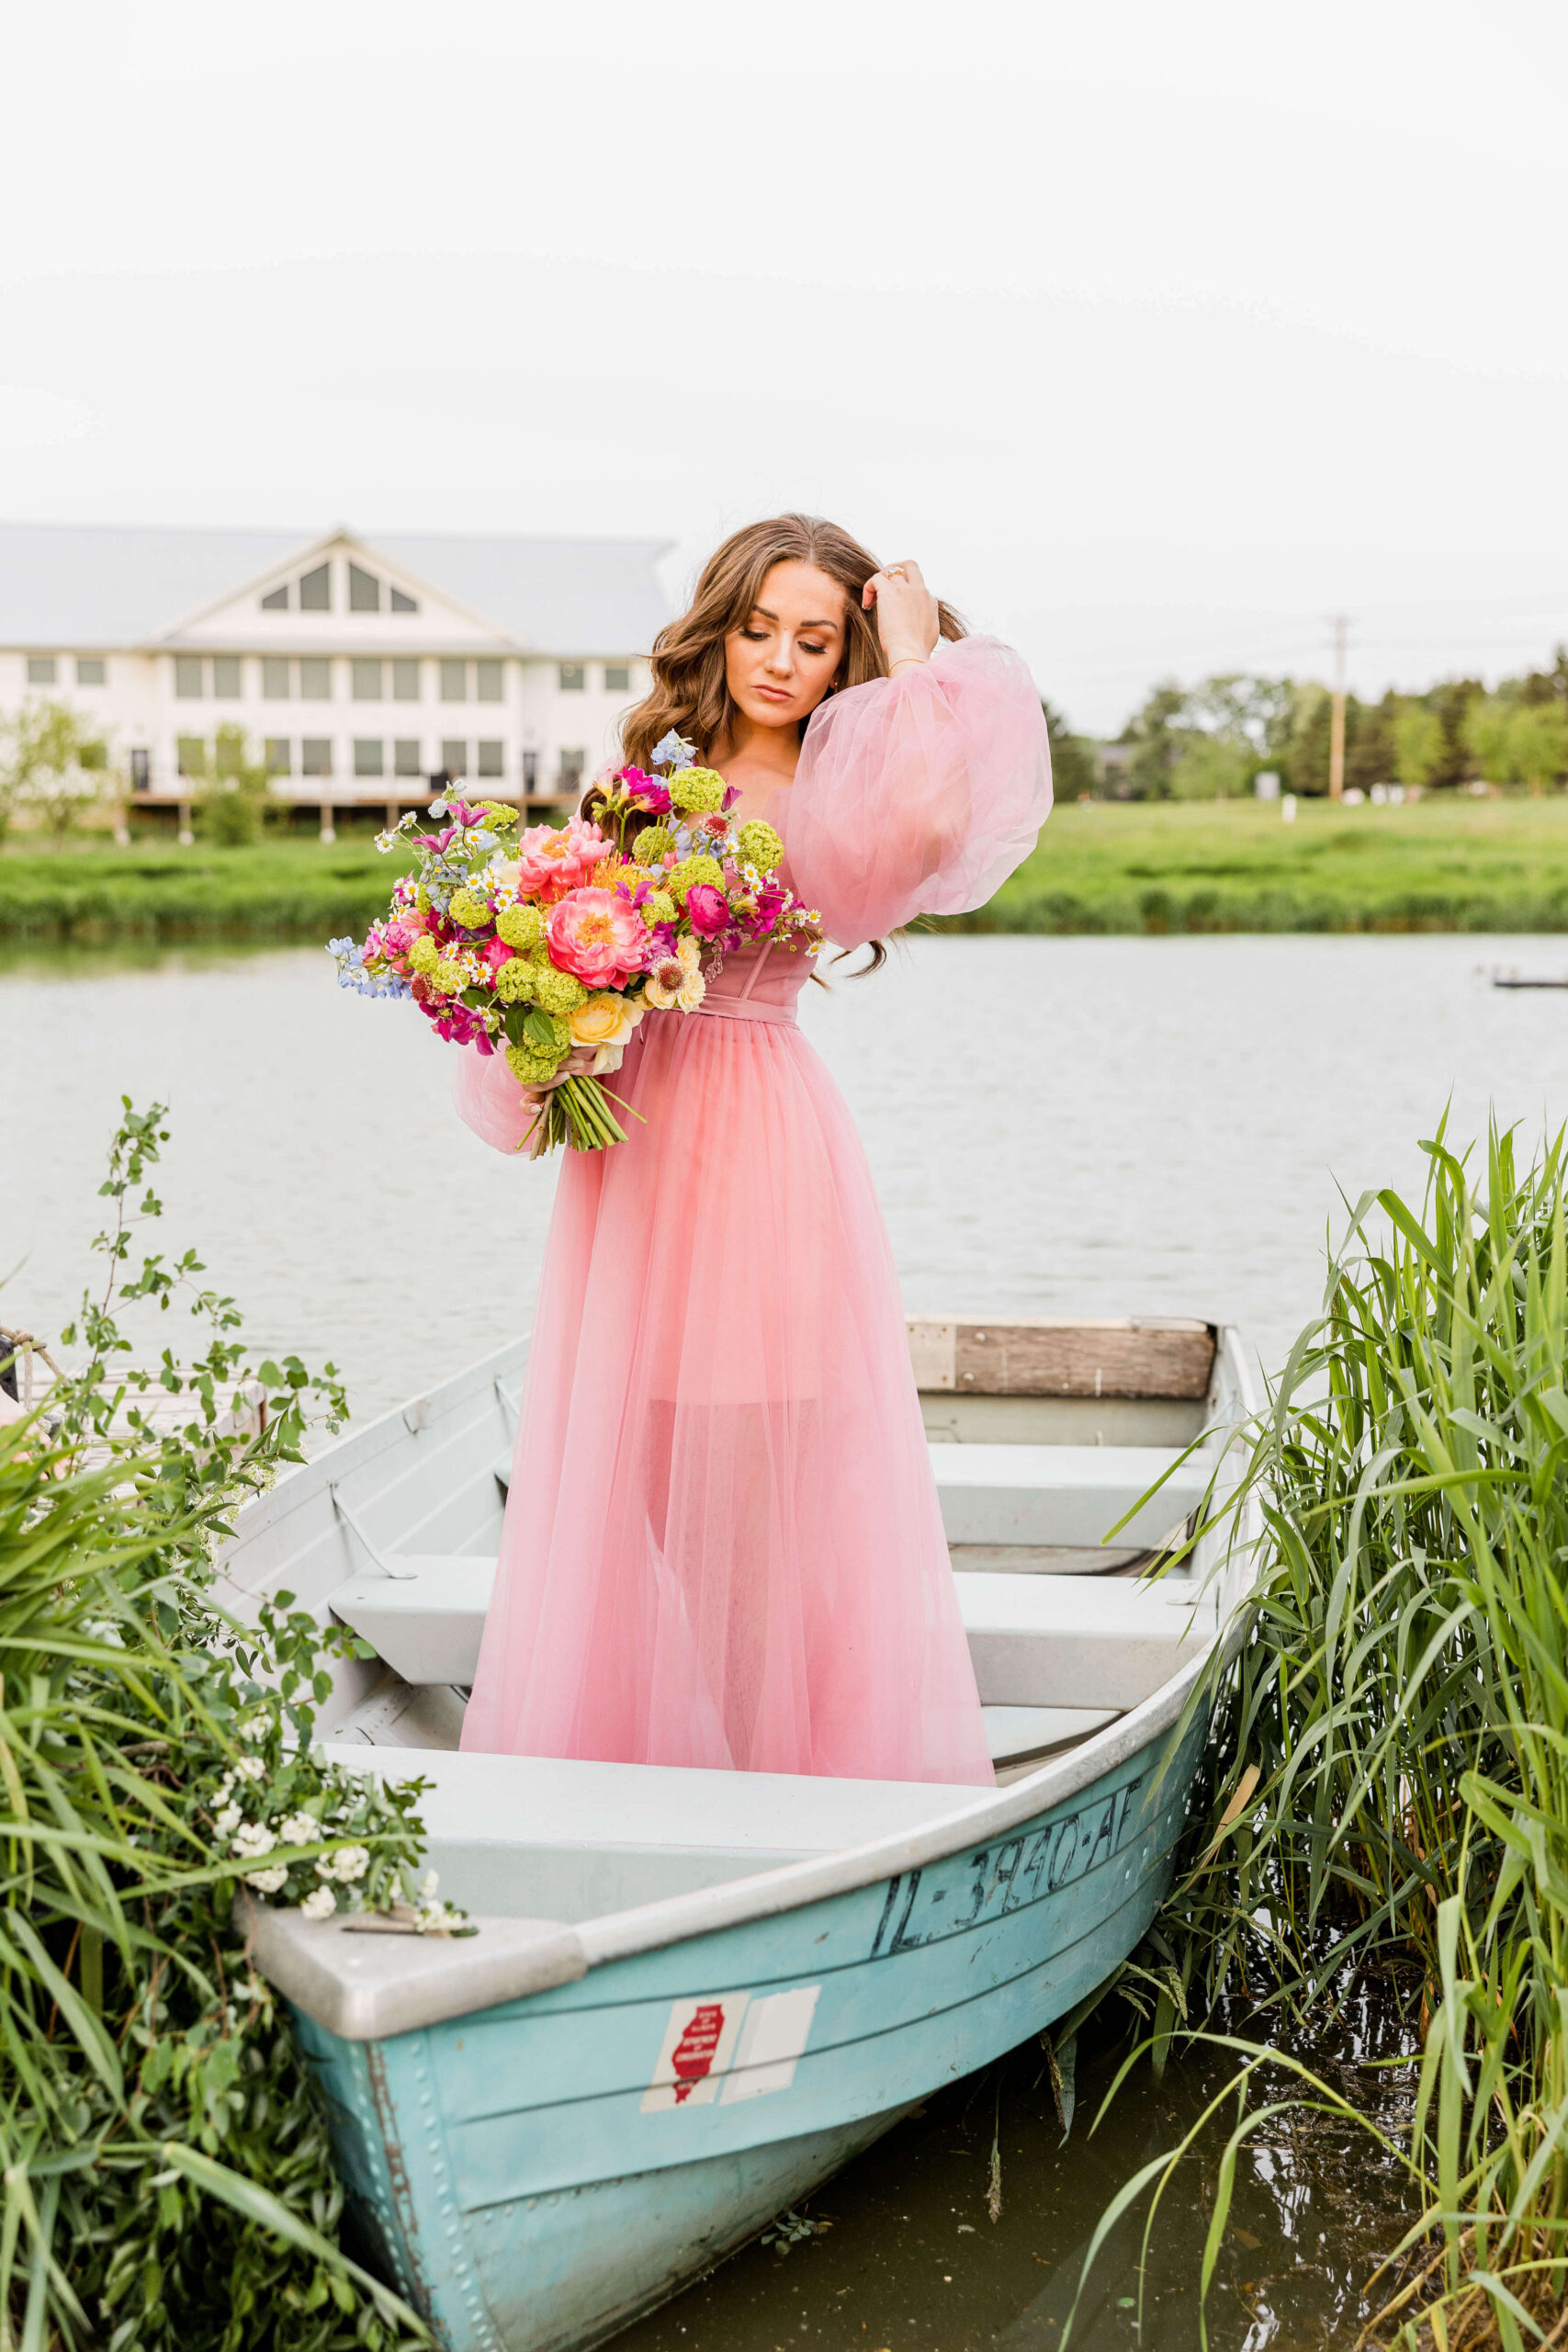 Bride in pink wedding gown in a blue paddle boat on a pond at Fete of Wales in Waukesha, Wisconsin.